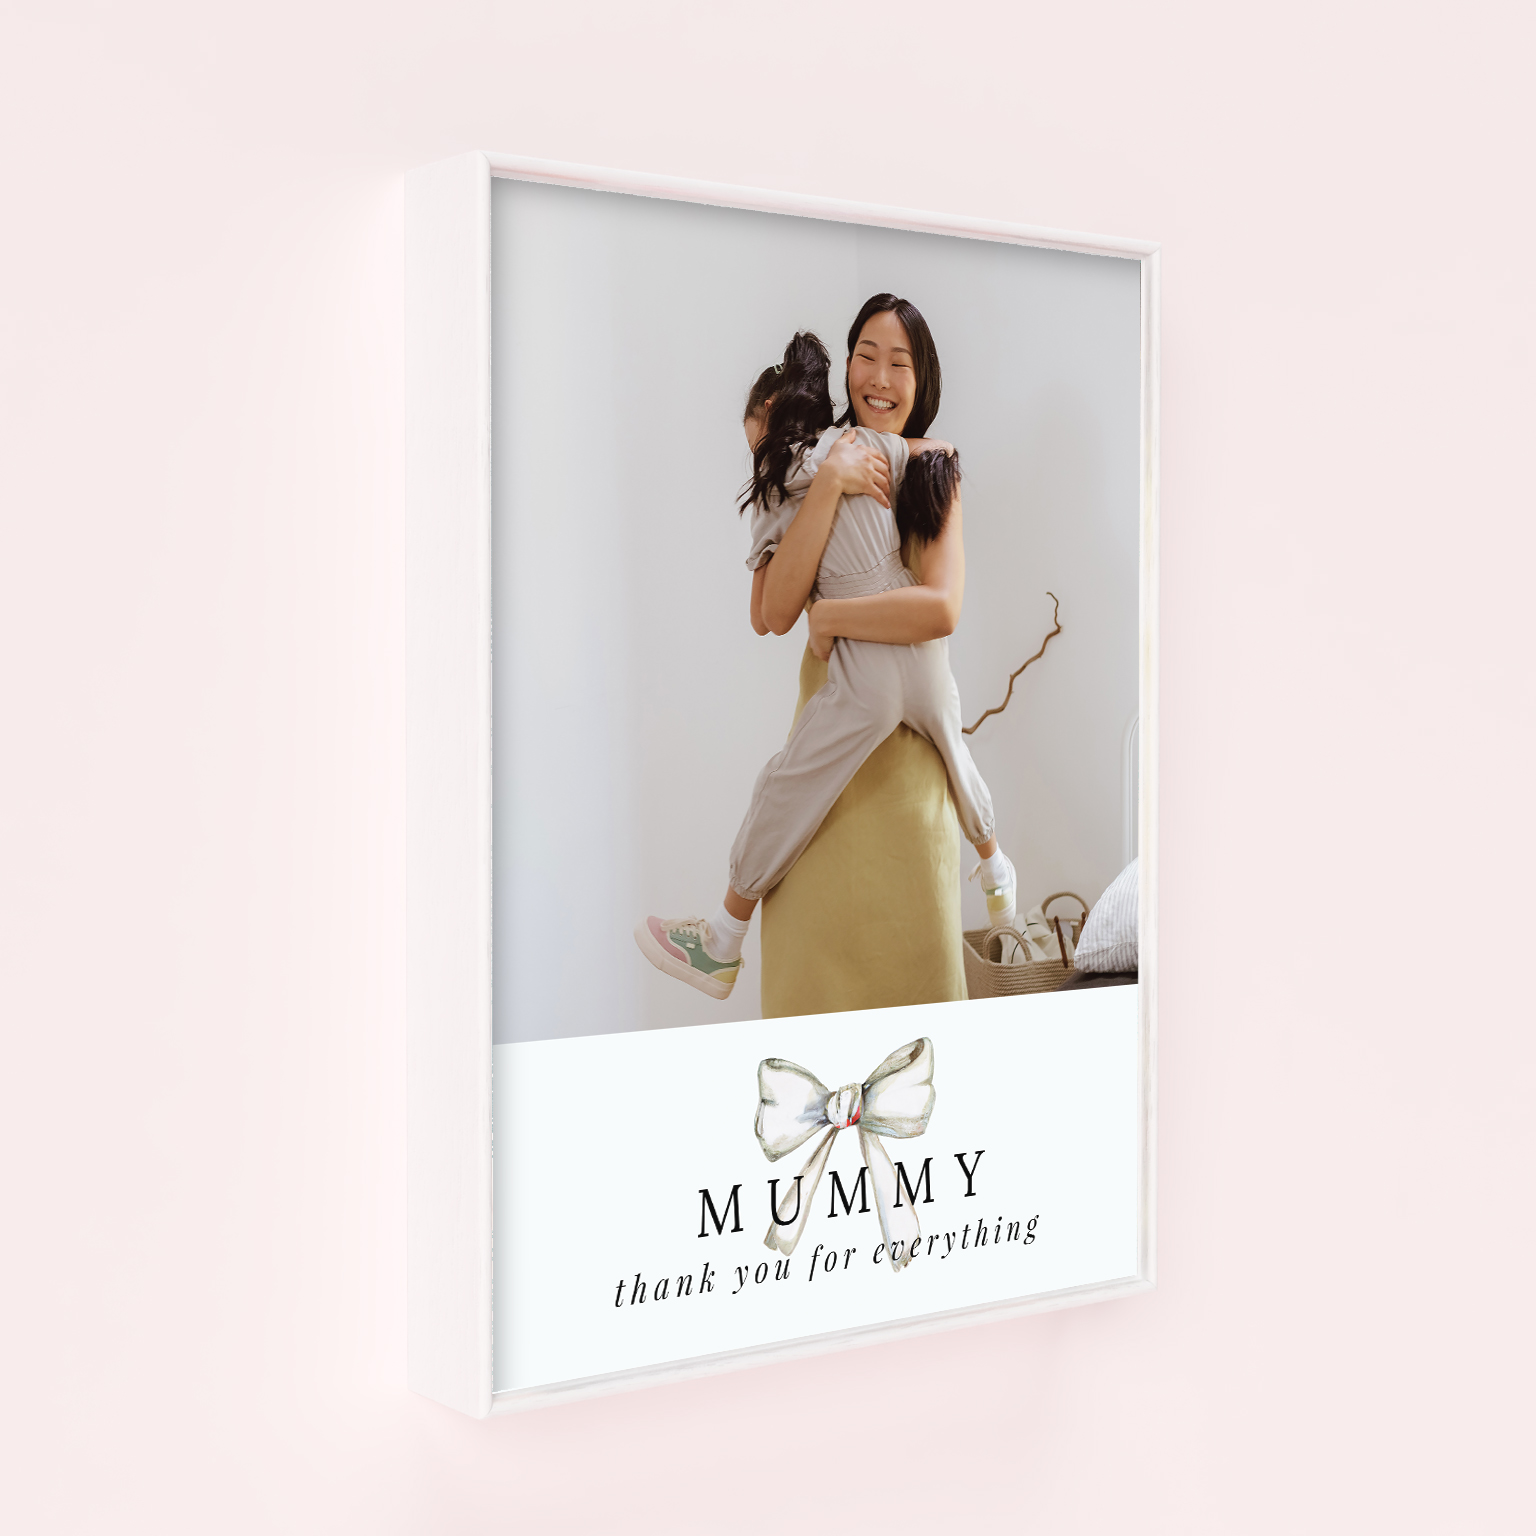 Tied with a Bow Framed Photo Canvas - Experience the charm of this portrait-oriented canvas elegantly showcasing a single photo. The perfect Mother's Day gift, expressing love and gratitude in a heartfelt and stylish manner.